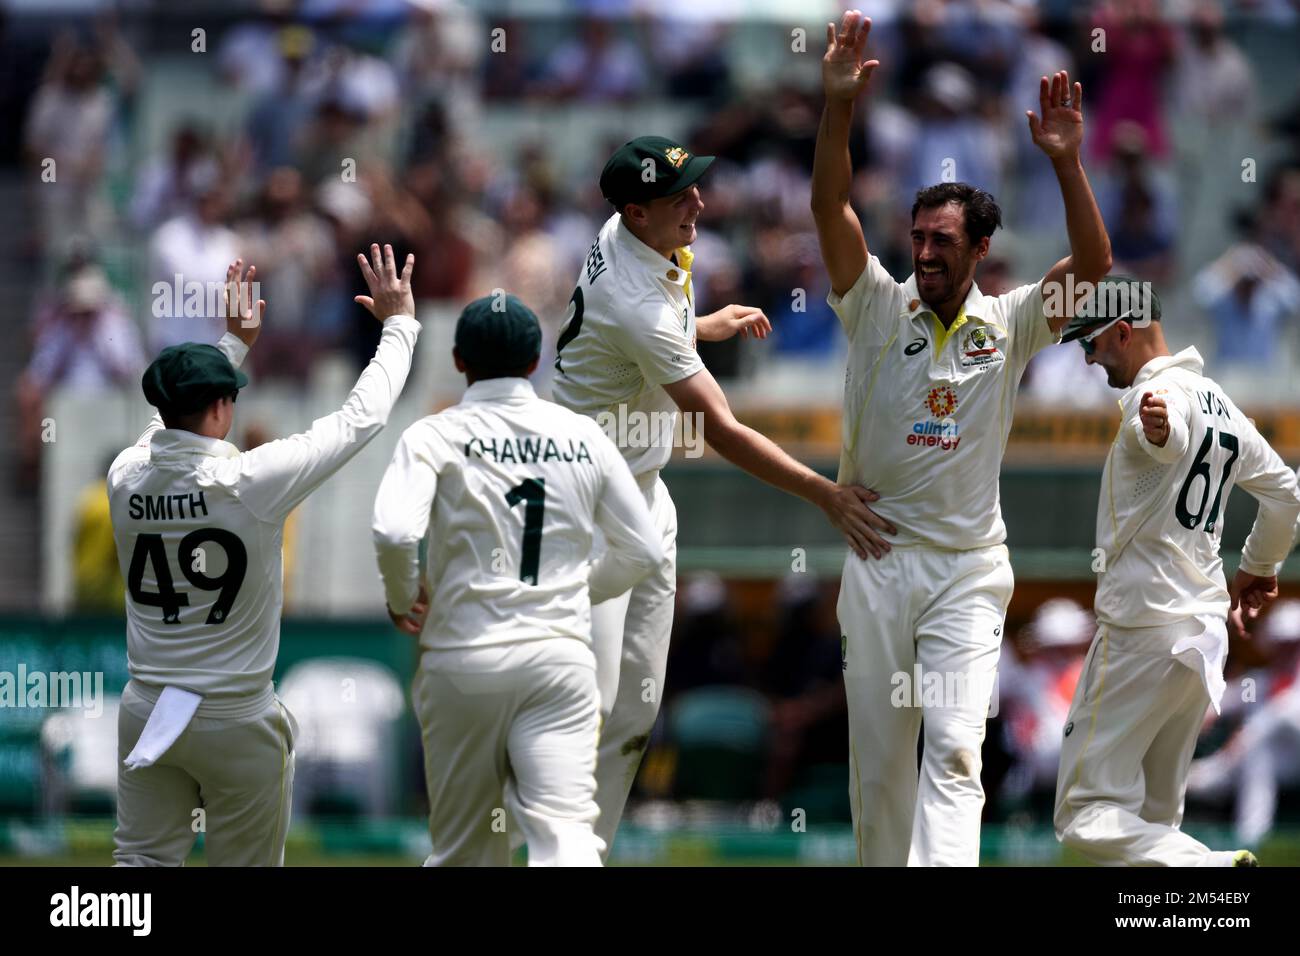 Melbourne, Australia, 26 December, 2022. The Australians celebrate a wicket during the Boxing Day Test Match between Australia and South Africa at The Melbourne Cricket Ground on December 26, 2022 in Melbourne, Australia. Credit: Dave Hewison/Speed Media/Alamy Live News Stock Photo